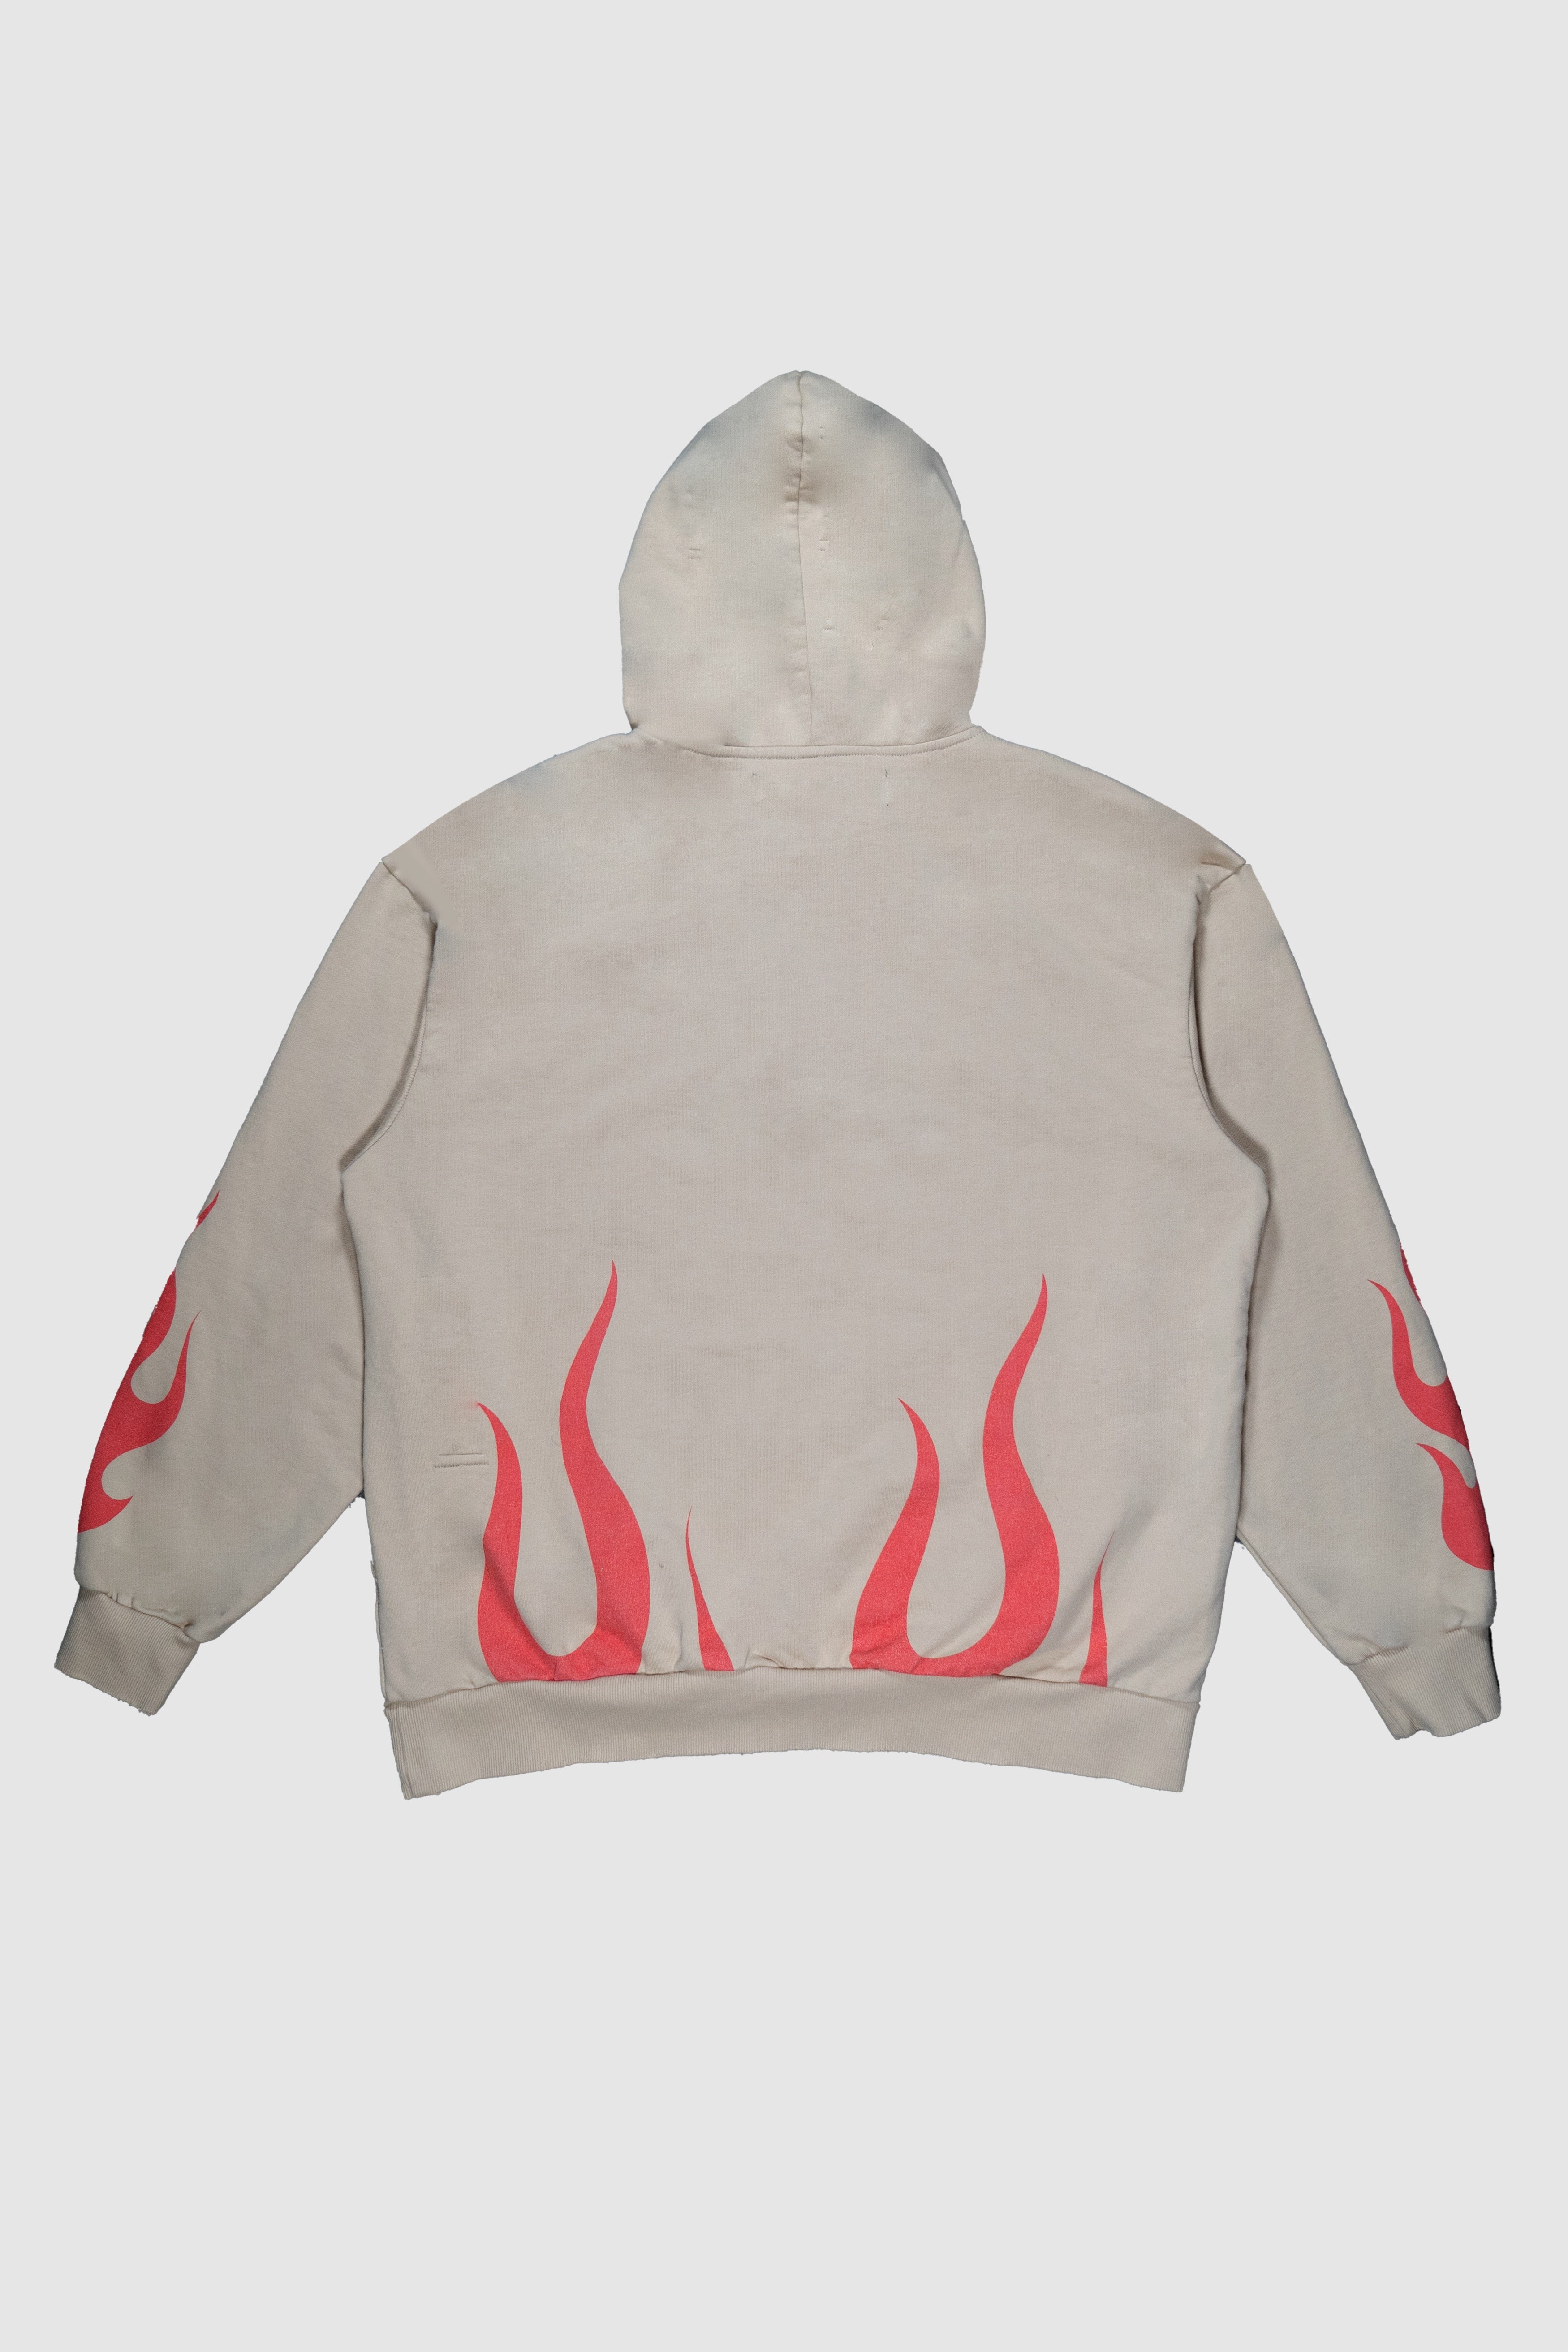 6thNBRHD PULLOVER "FIRST PLACE" CREAM